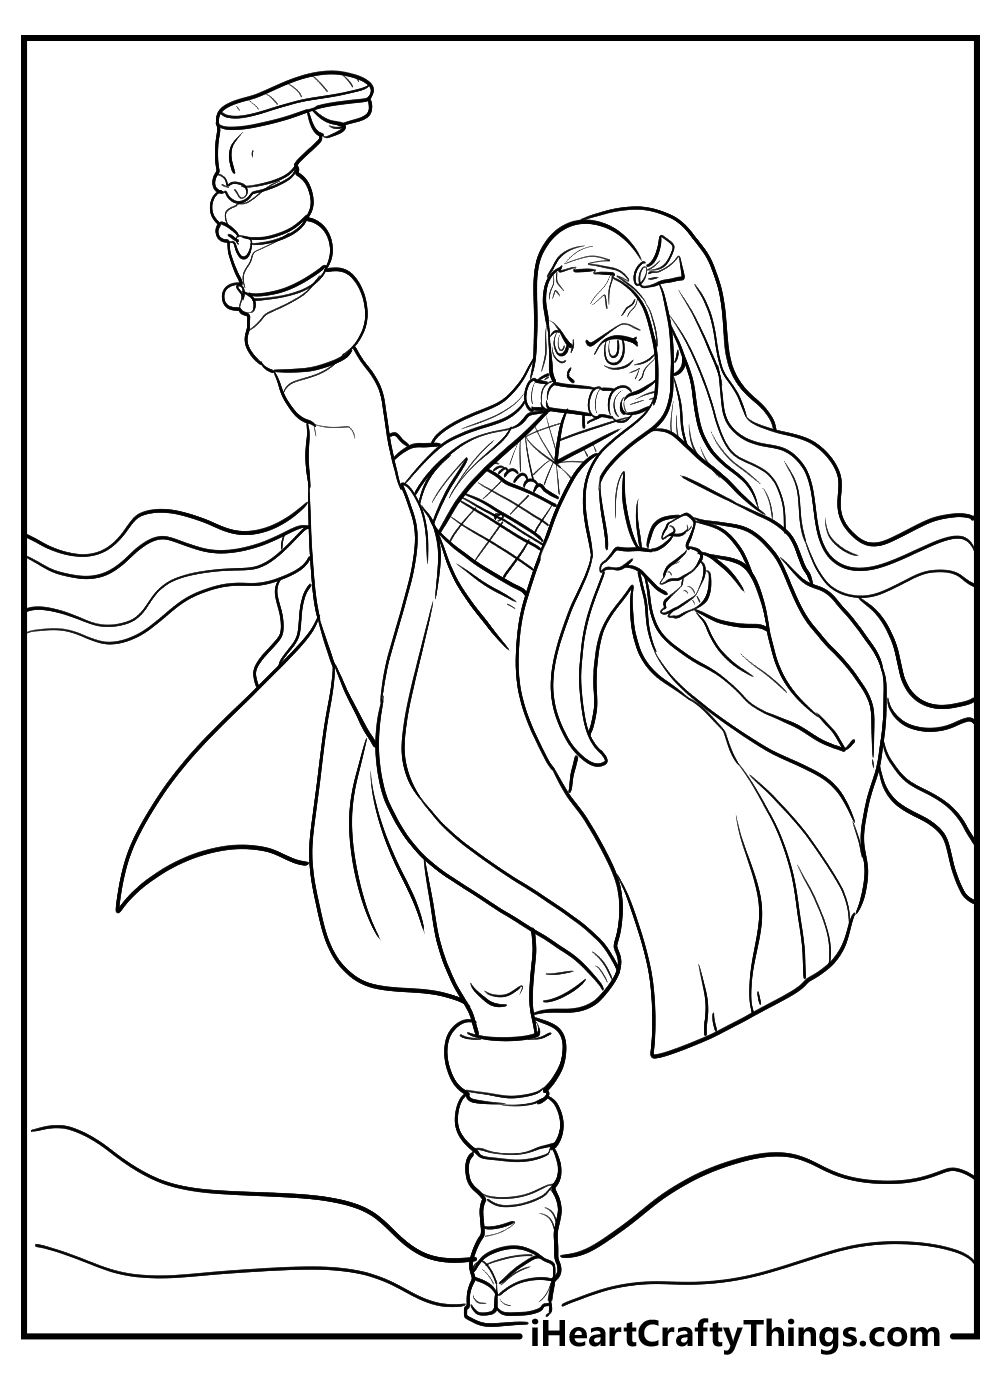 nezuko drawing coloring pages